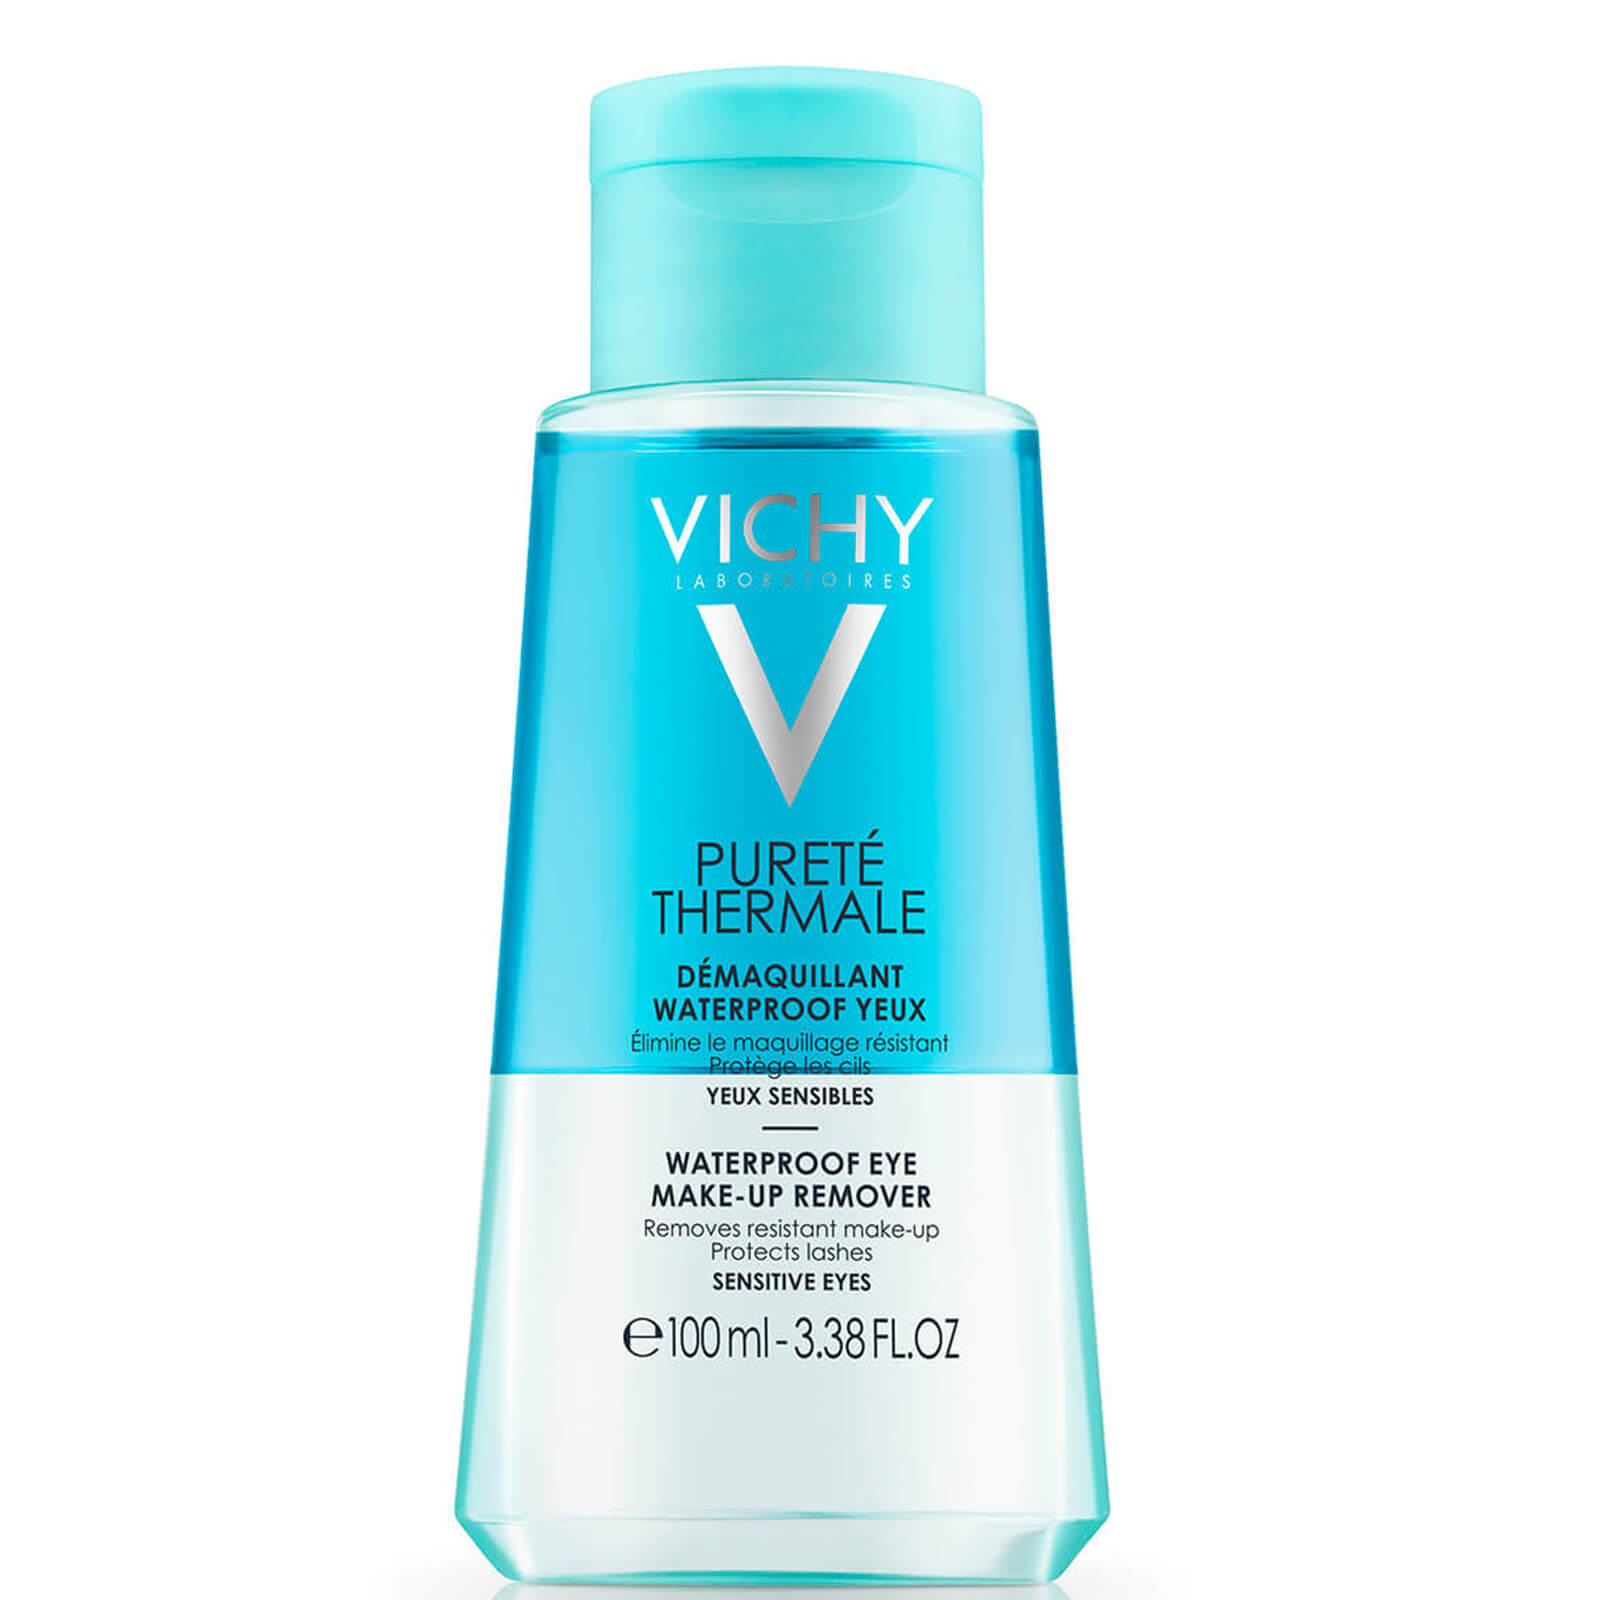 VICHY Purete Thermale Waterproof Eye Make-up Remover 100ml